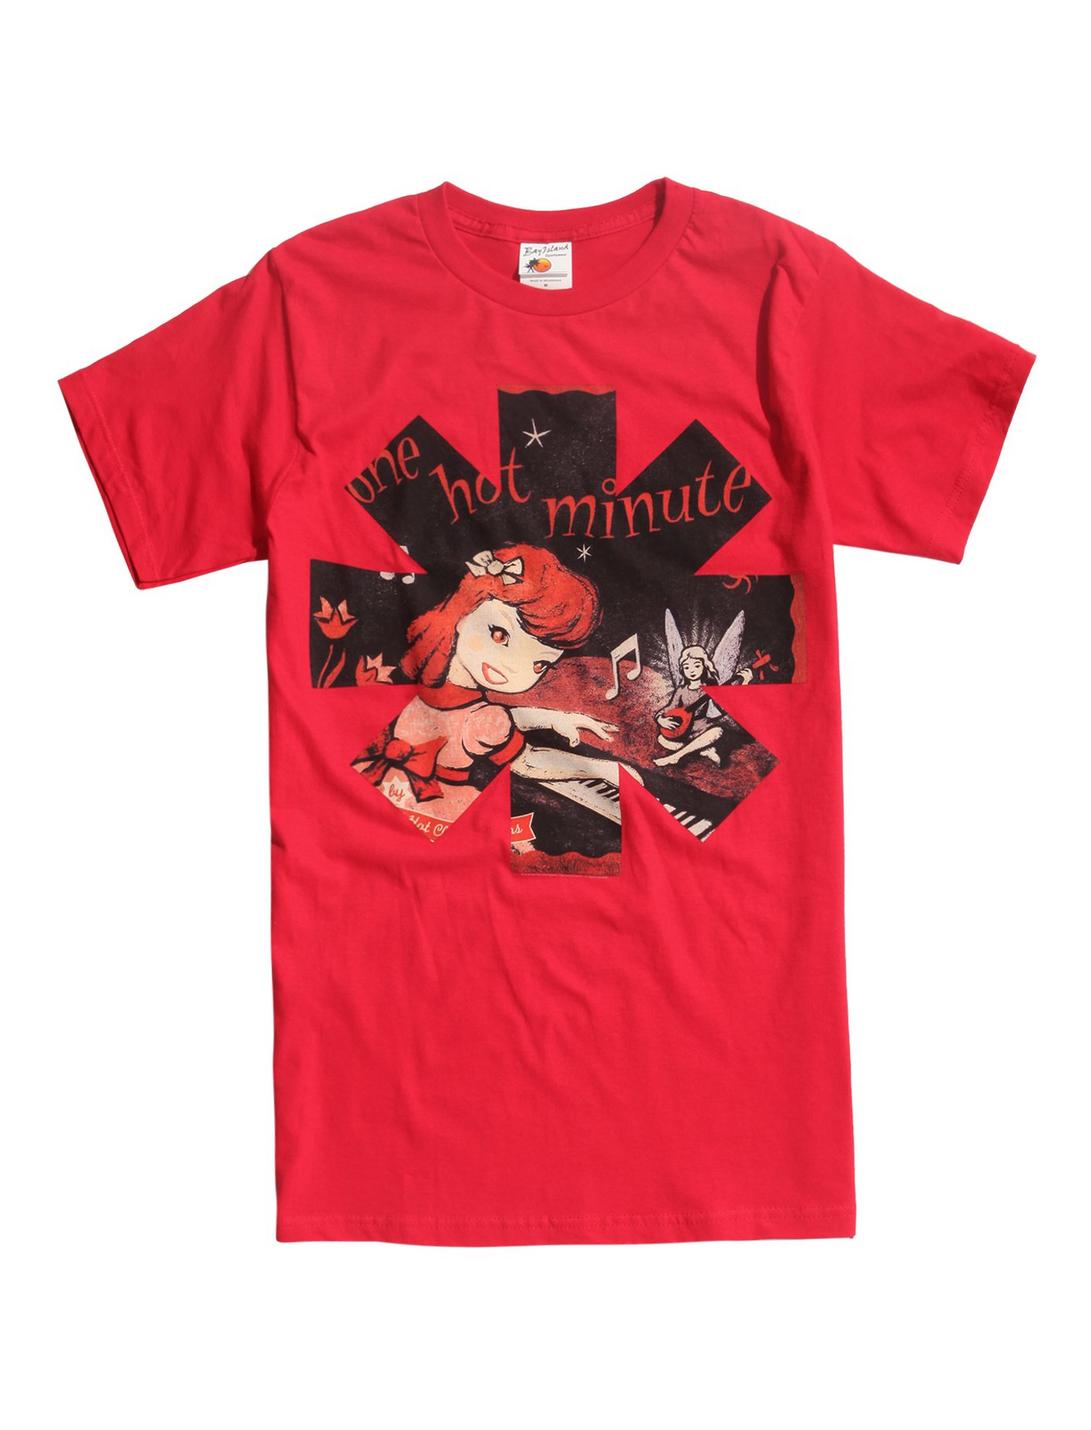 Red Hot Chili Peppers One Hot Minute T-Shirt, RED, hi-res